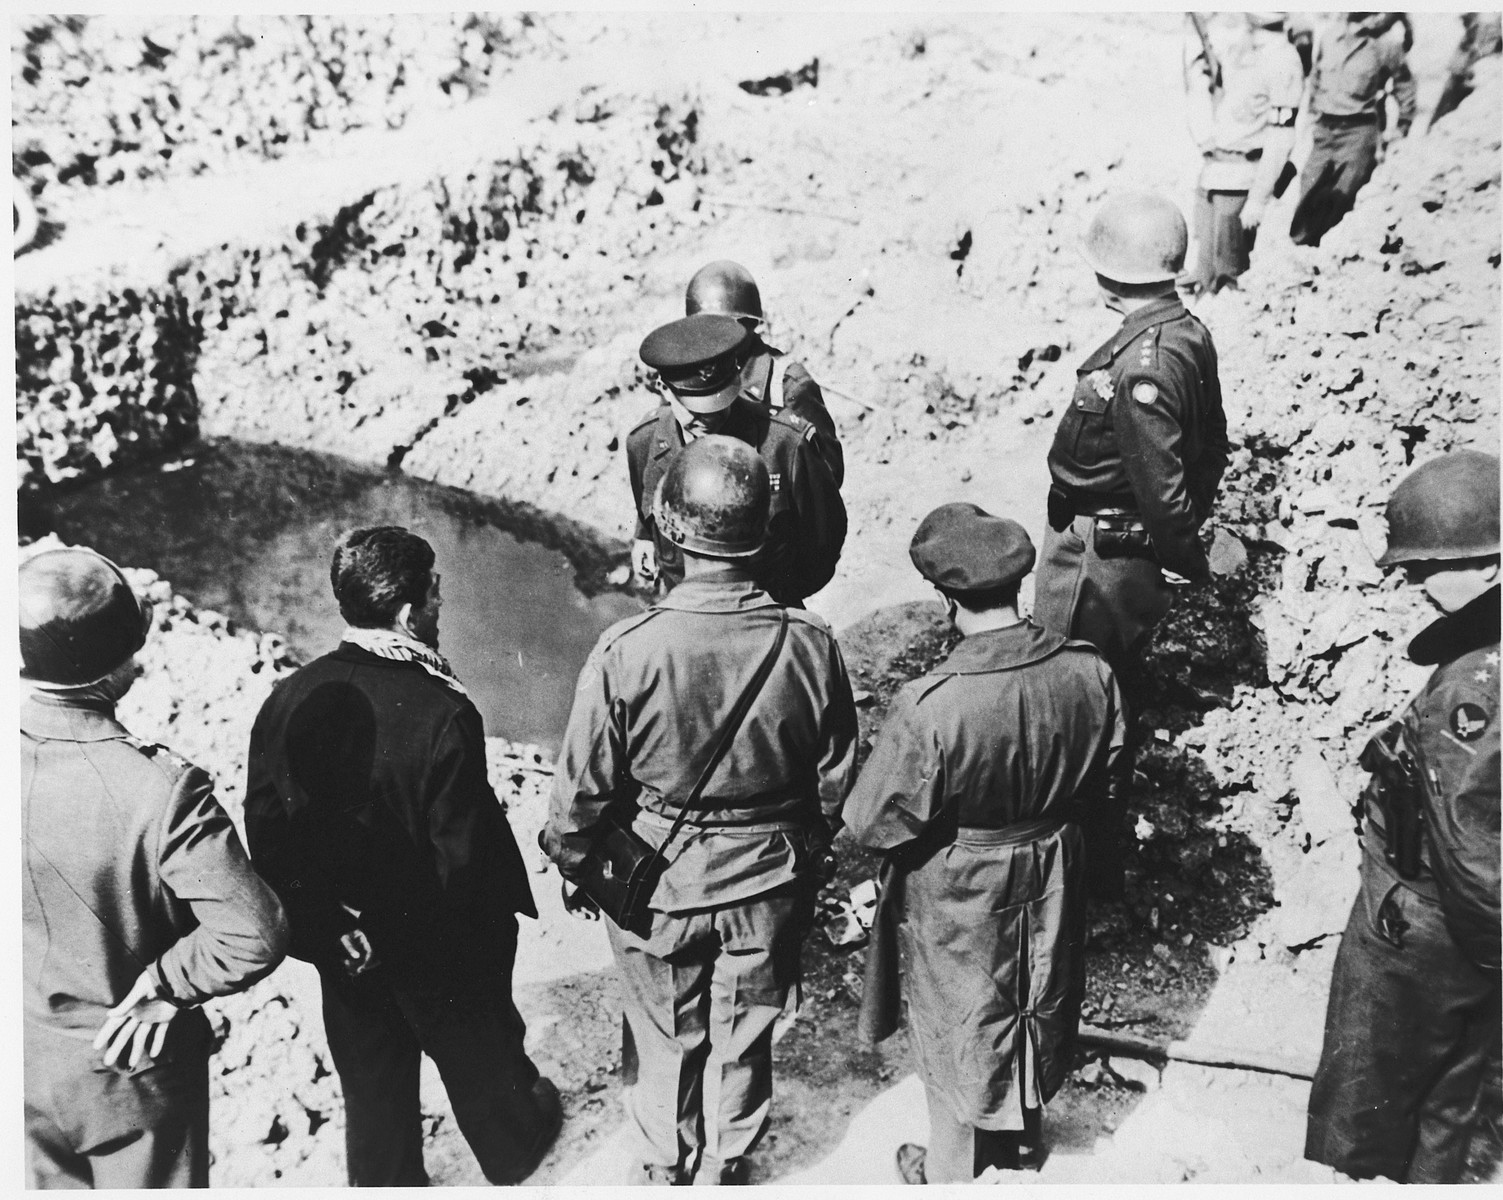 High-ranking U.S. Army officers examine a mass grave in the newly liberated Ohrdruf concentration camp.

Among those pictured are Generals Dwight D. Eisenhower, George Patton, Omar Bradley and Manton Eddy.  Also pictured is Jules Grad, correspondent for the U.S. Army newspaper, "Stars and Stripes".  Also pictured is Ignaz Feldmann (back to camera, wearing a dark coat and a scarf) . He was a survivor of  Westerbork, Terezin, Auschwitz, and Ohrdruf camps.   He was also a player on the famed Hakoah Vienna soccer teams of the 1920s and 30s.